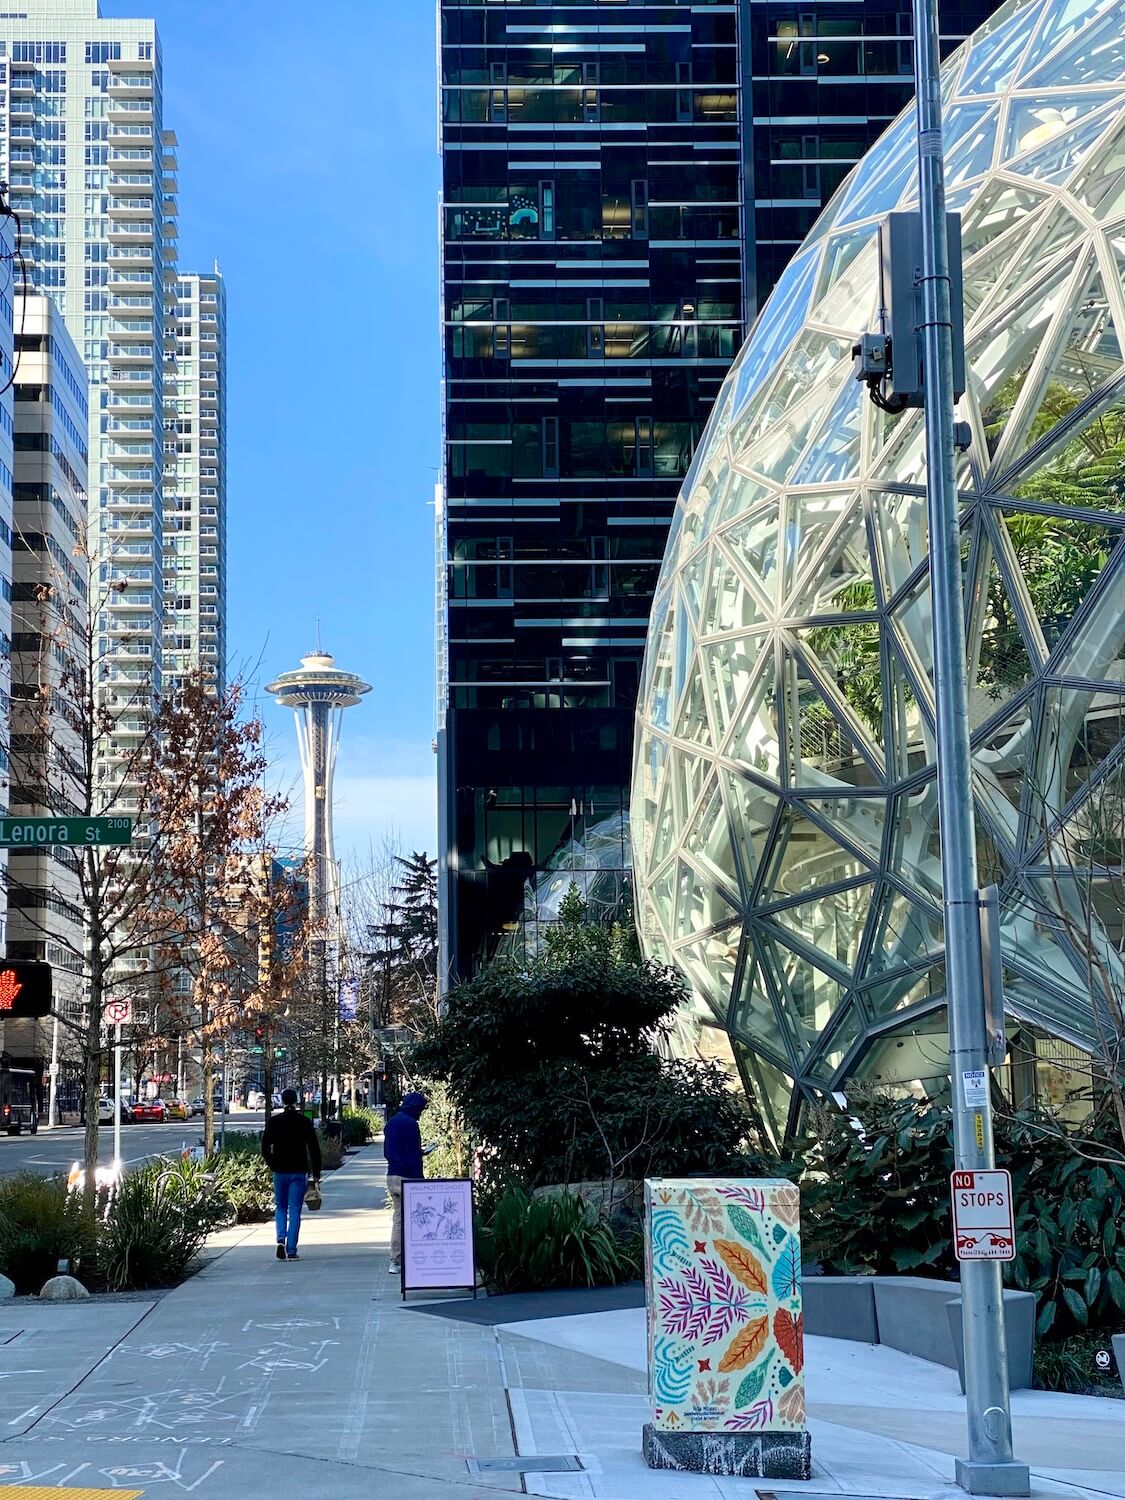 The Space Needle rises in the background of this shot taken near the Amazon Spheres in Downtown Seattle.  The modern buildings are a fun thing to explore when outdoors in the Summer. 